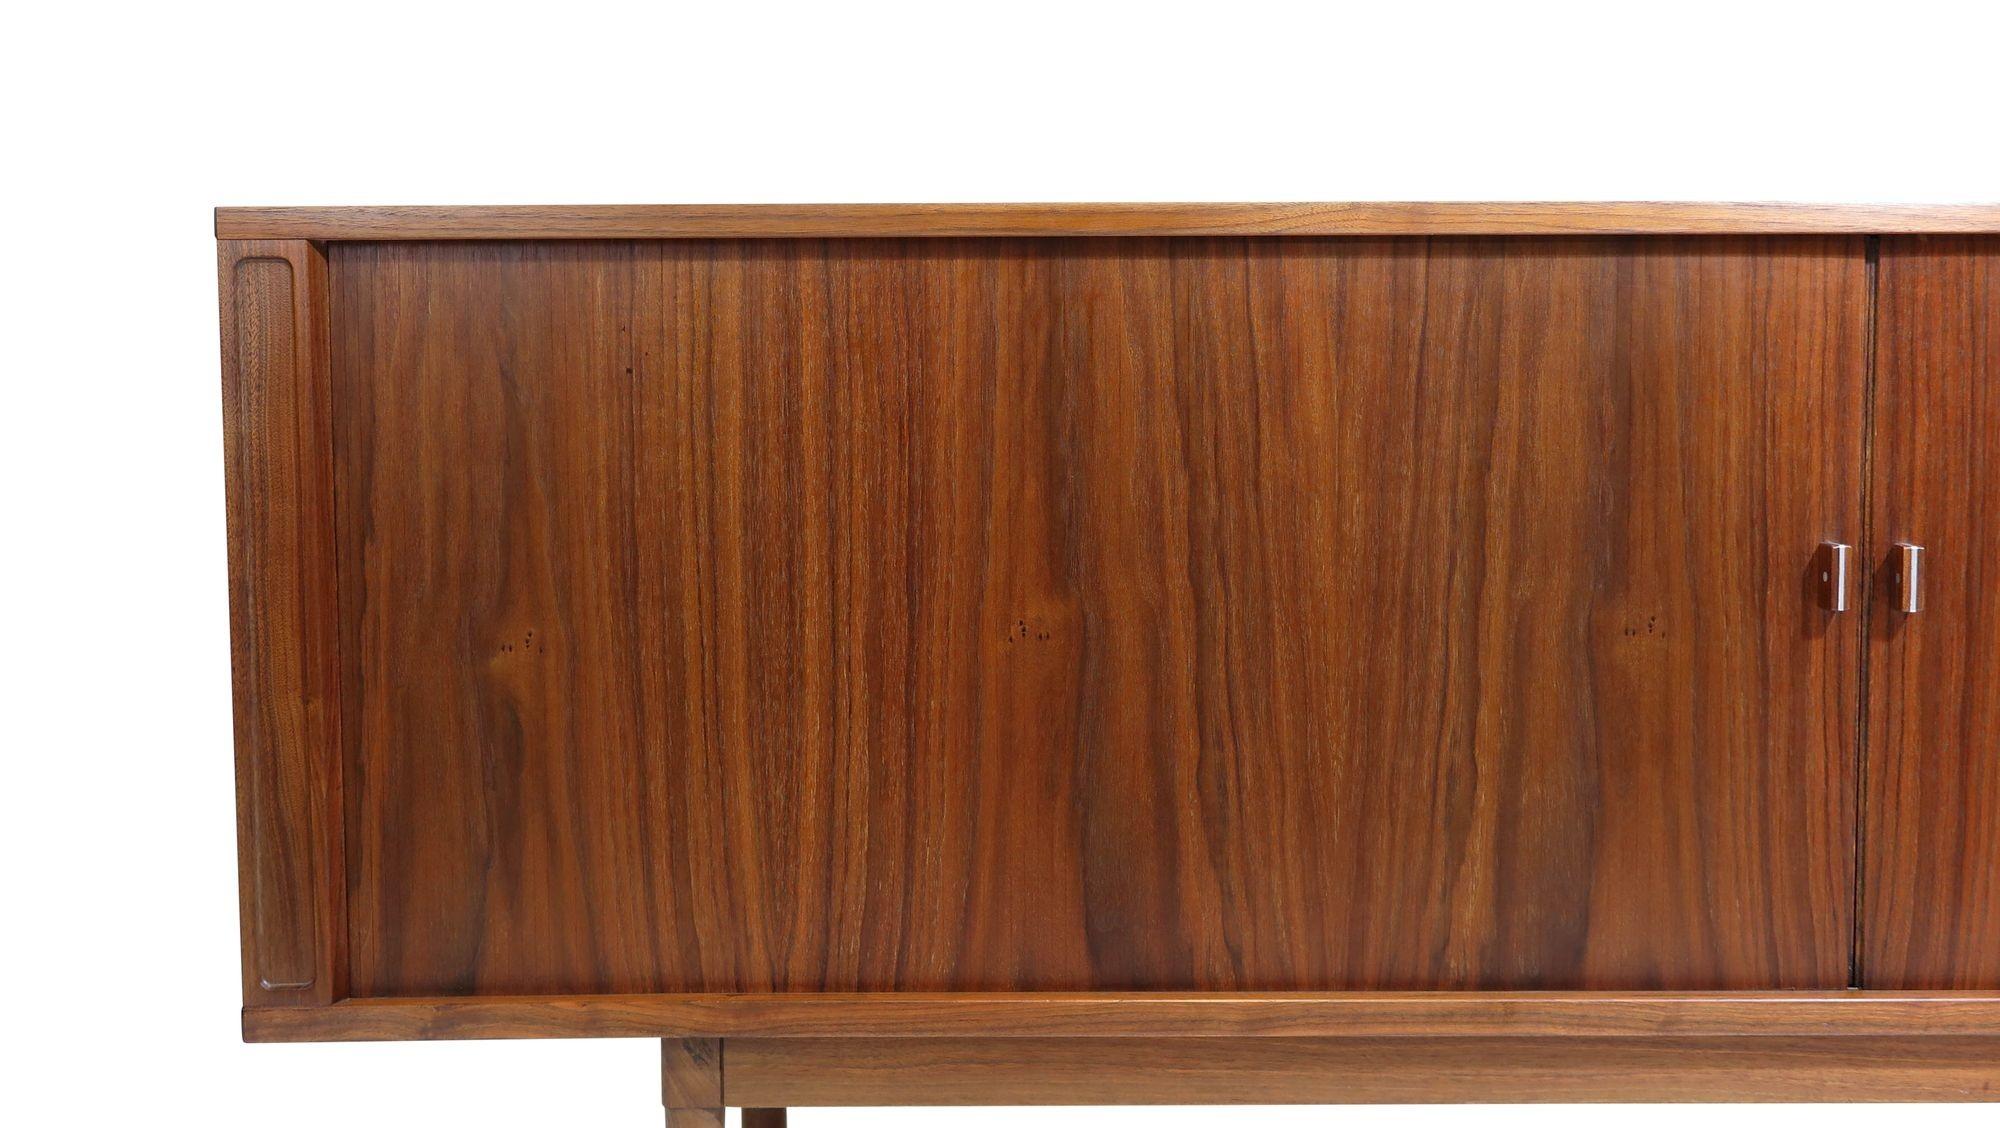 Walnut credenza designed by Danish designer, Peter Lovig Nielsen, 1965 Denmark. The cabinet is crafted of walnut with tambour doors, which open to reveal an interior with adjustable shelves and silverware drawers. The cabinet is fully restored and